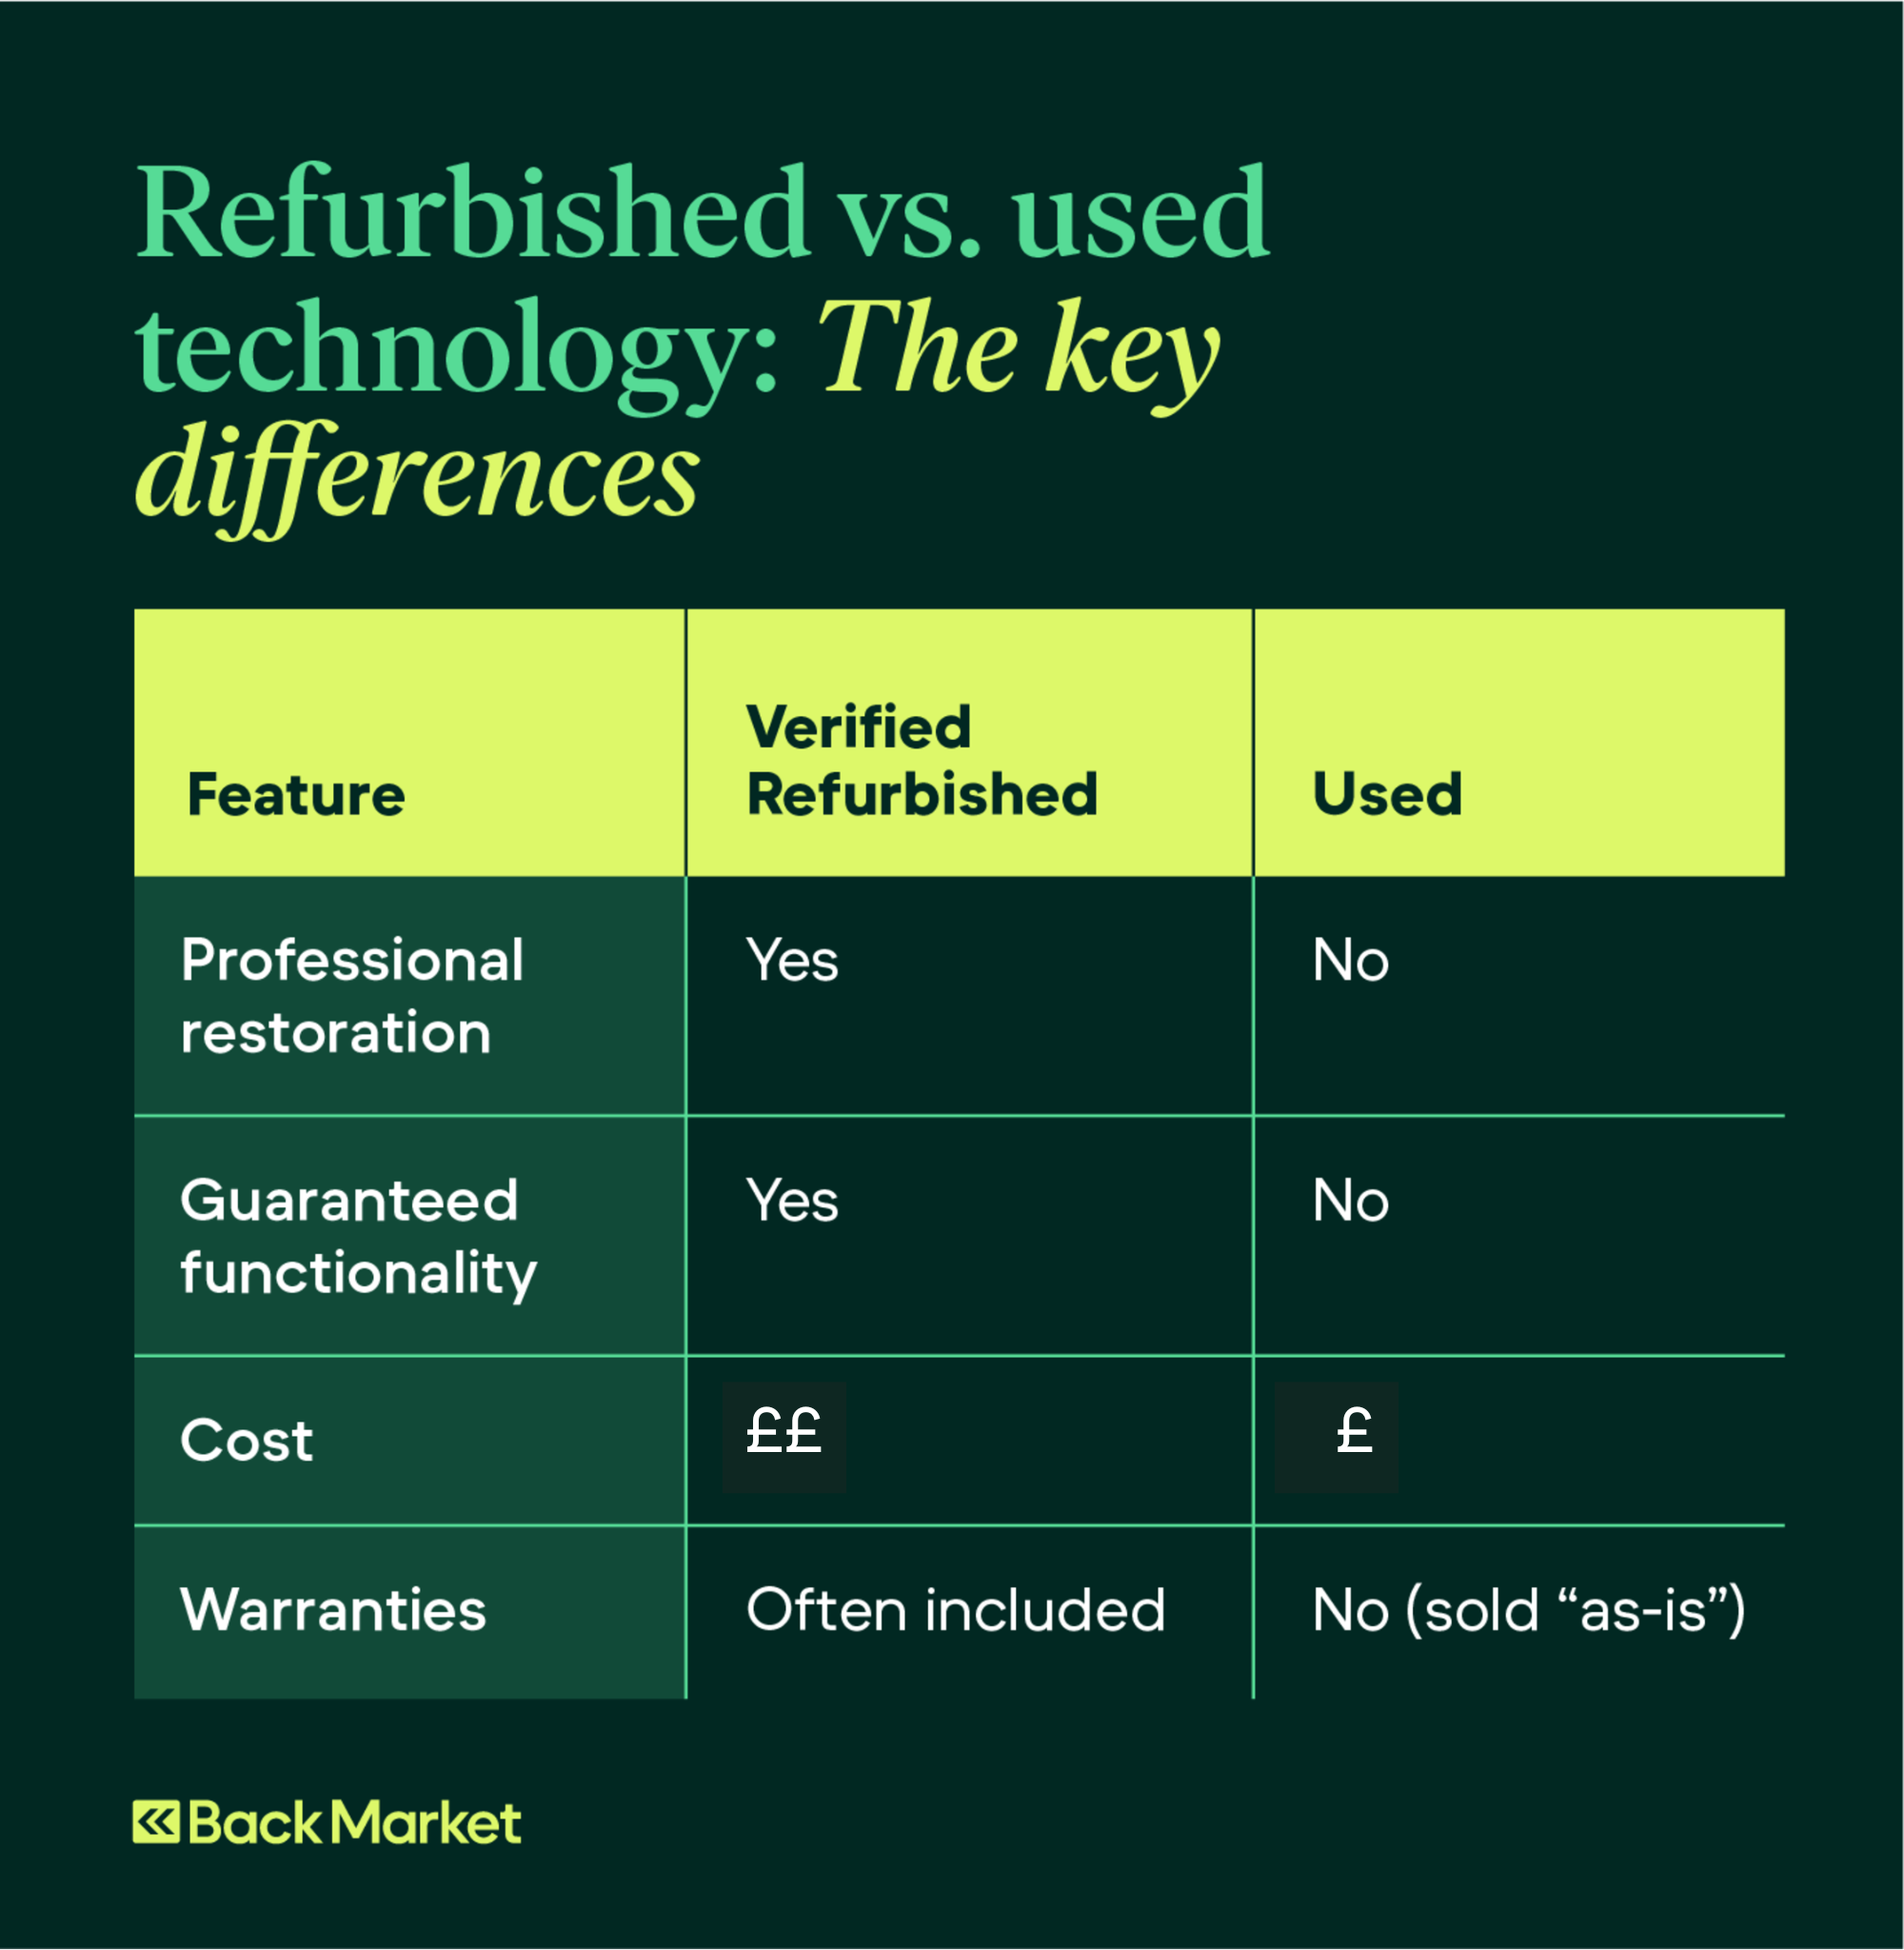 A graphic shows the key differences between refurbished and used technology.